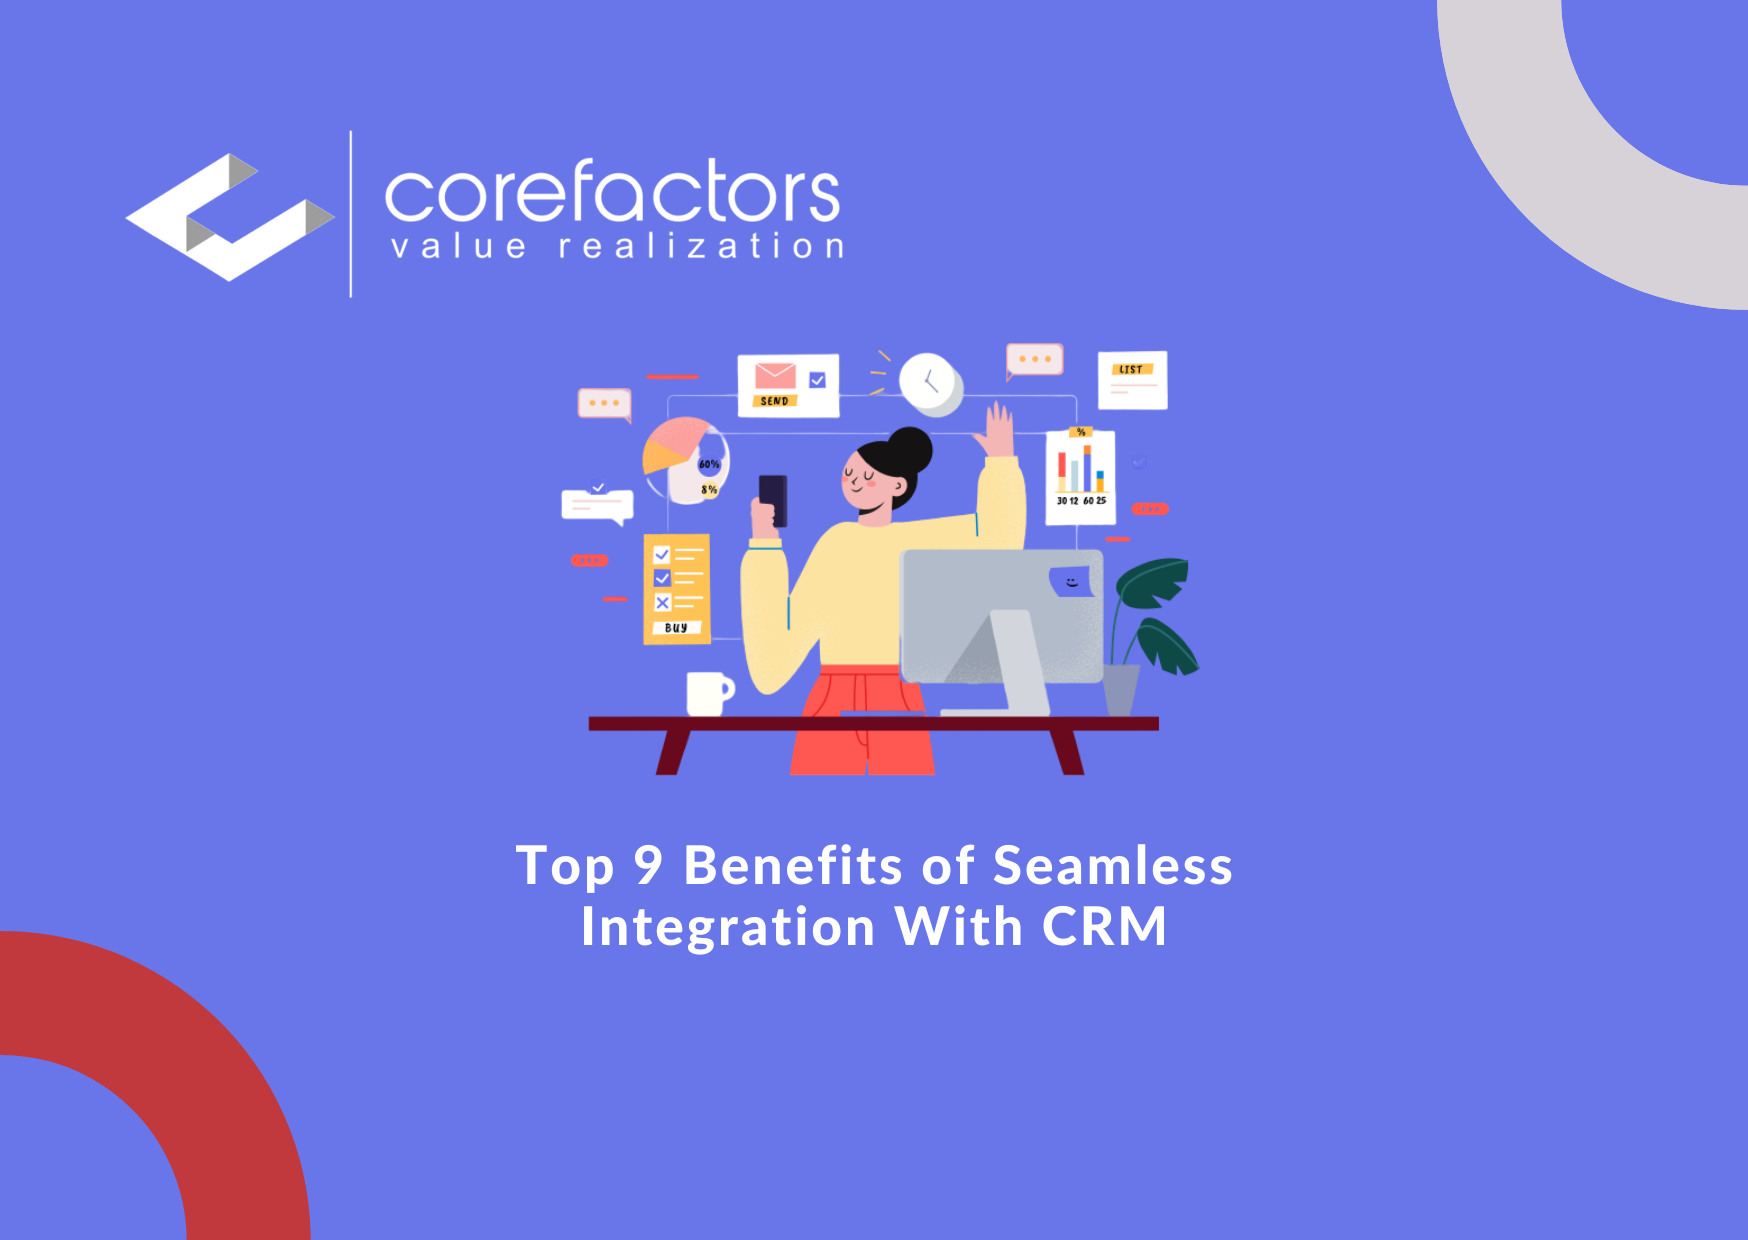 Top 9 Benefits of Seamless Integrations with CRM